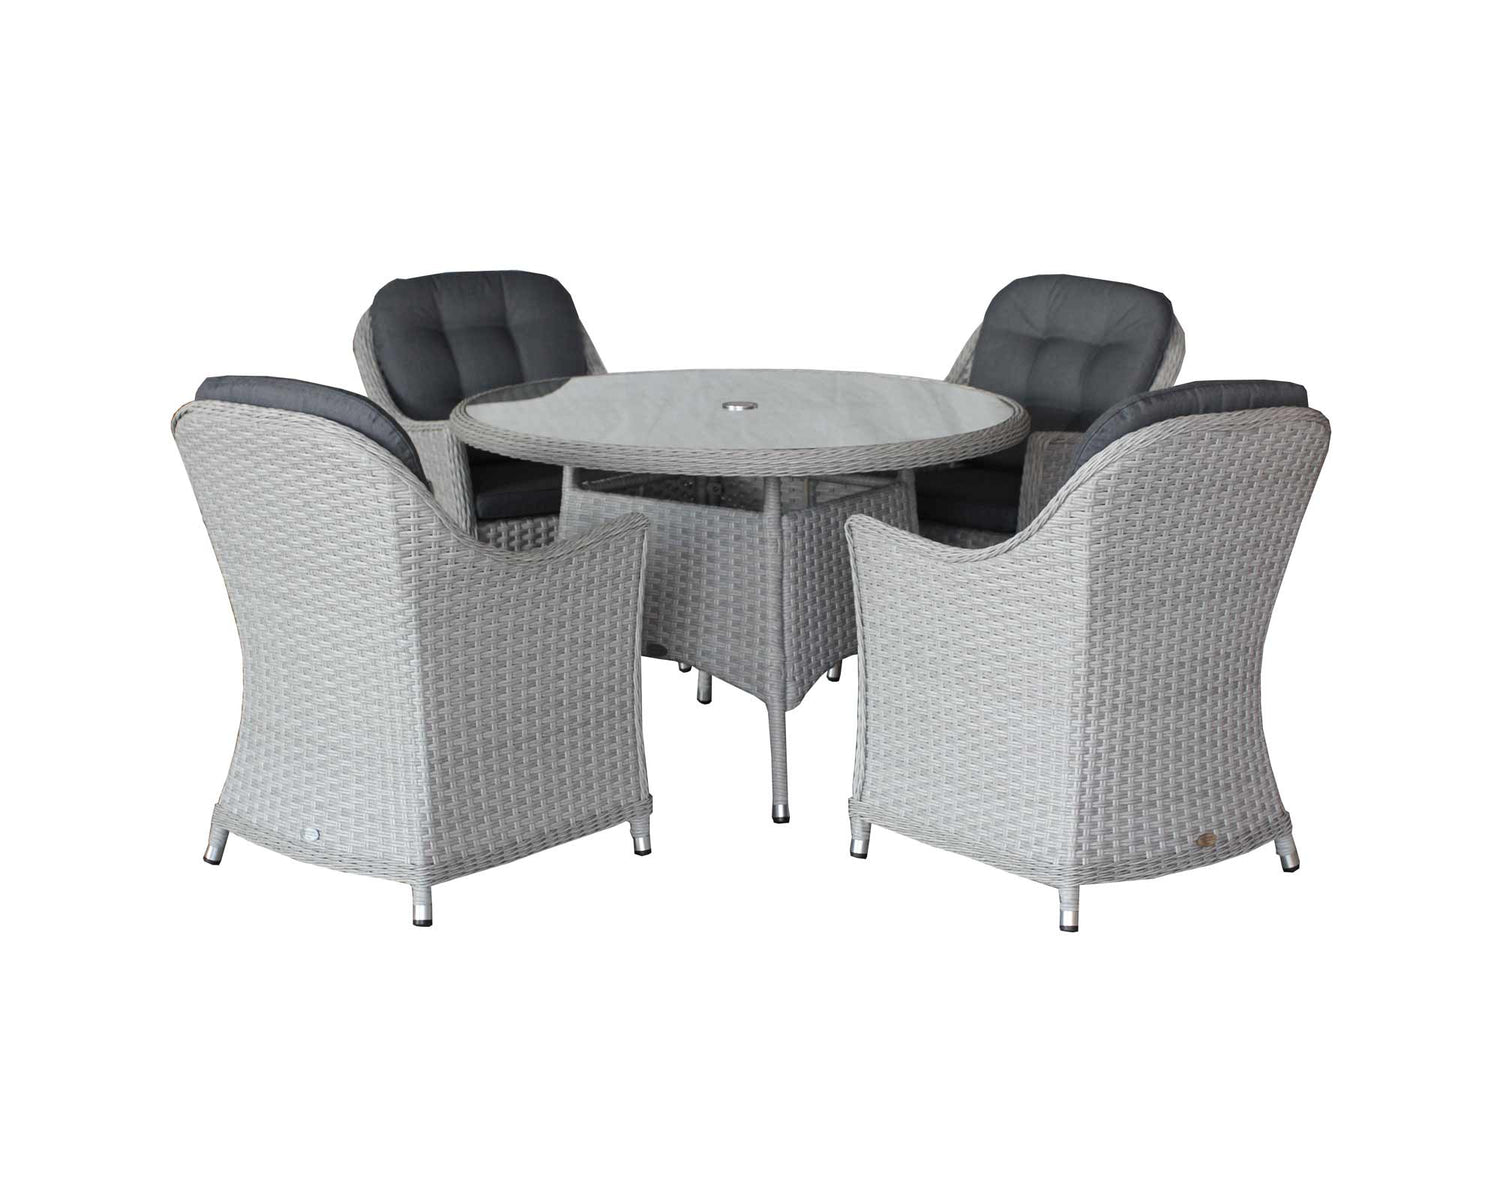 X24WCWT120RD2-Wentworth-120cm-Round-Table-with-4-Armchairs-4-seater-333.jpg